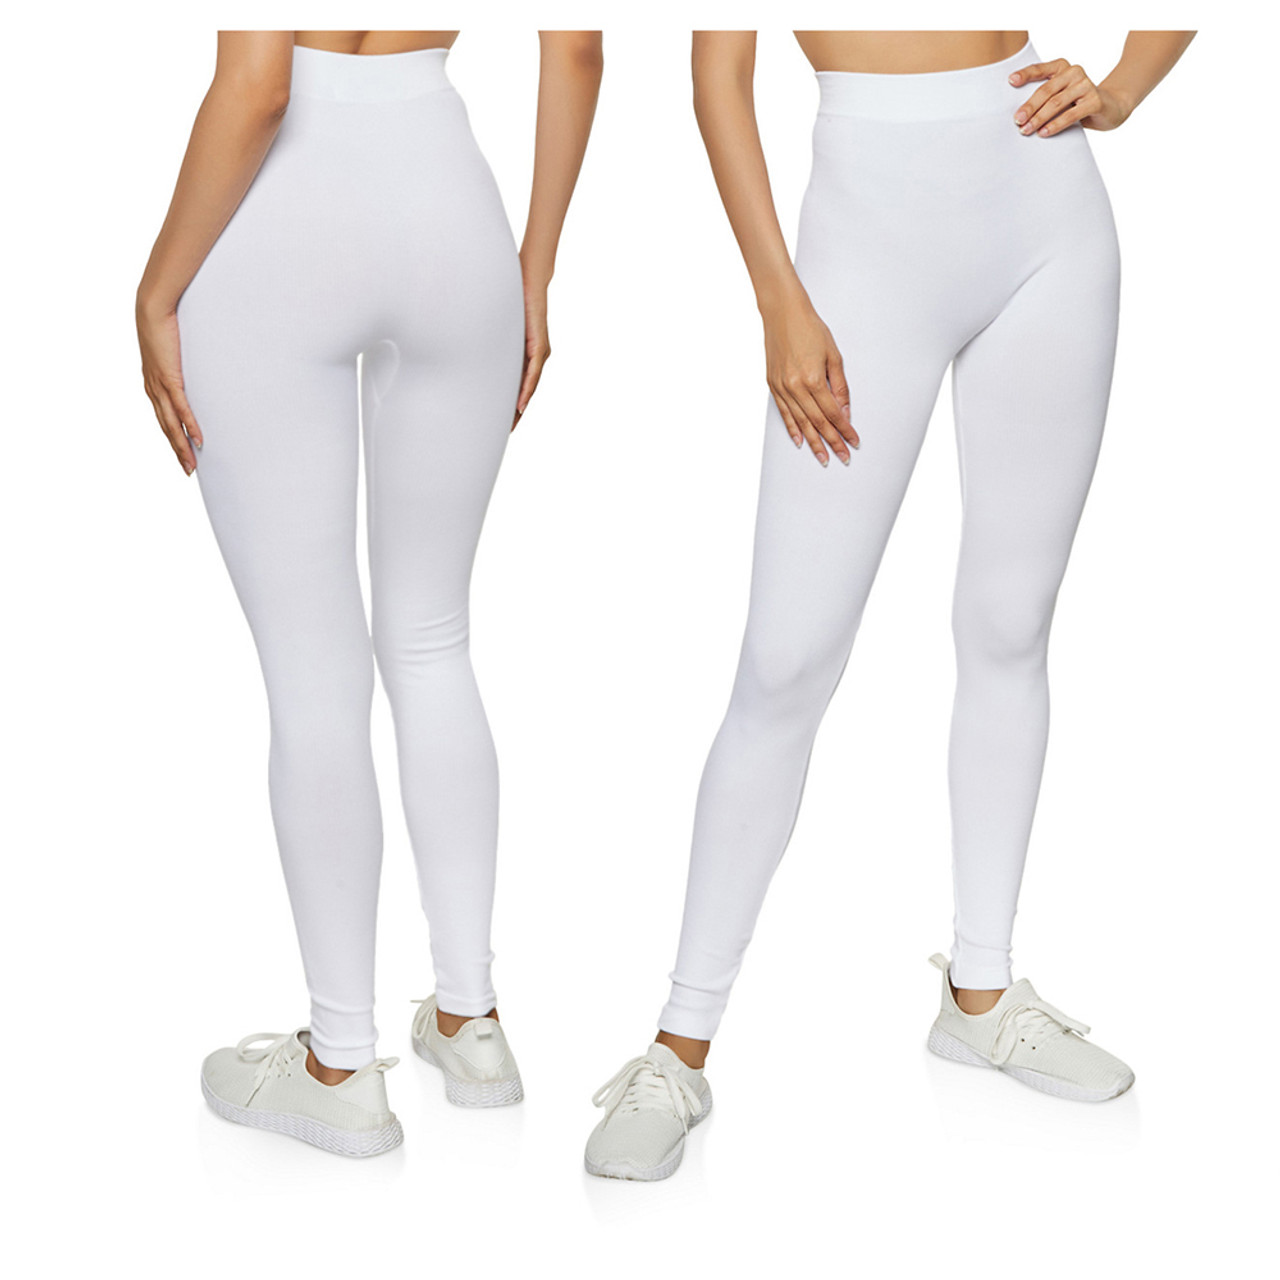 NEW LADIES RIBBED SEAMLESS LEGGINGS HIGH WAIST TUMMY CONTROL SOLID STRETCHY